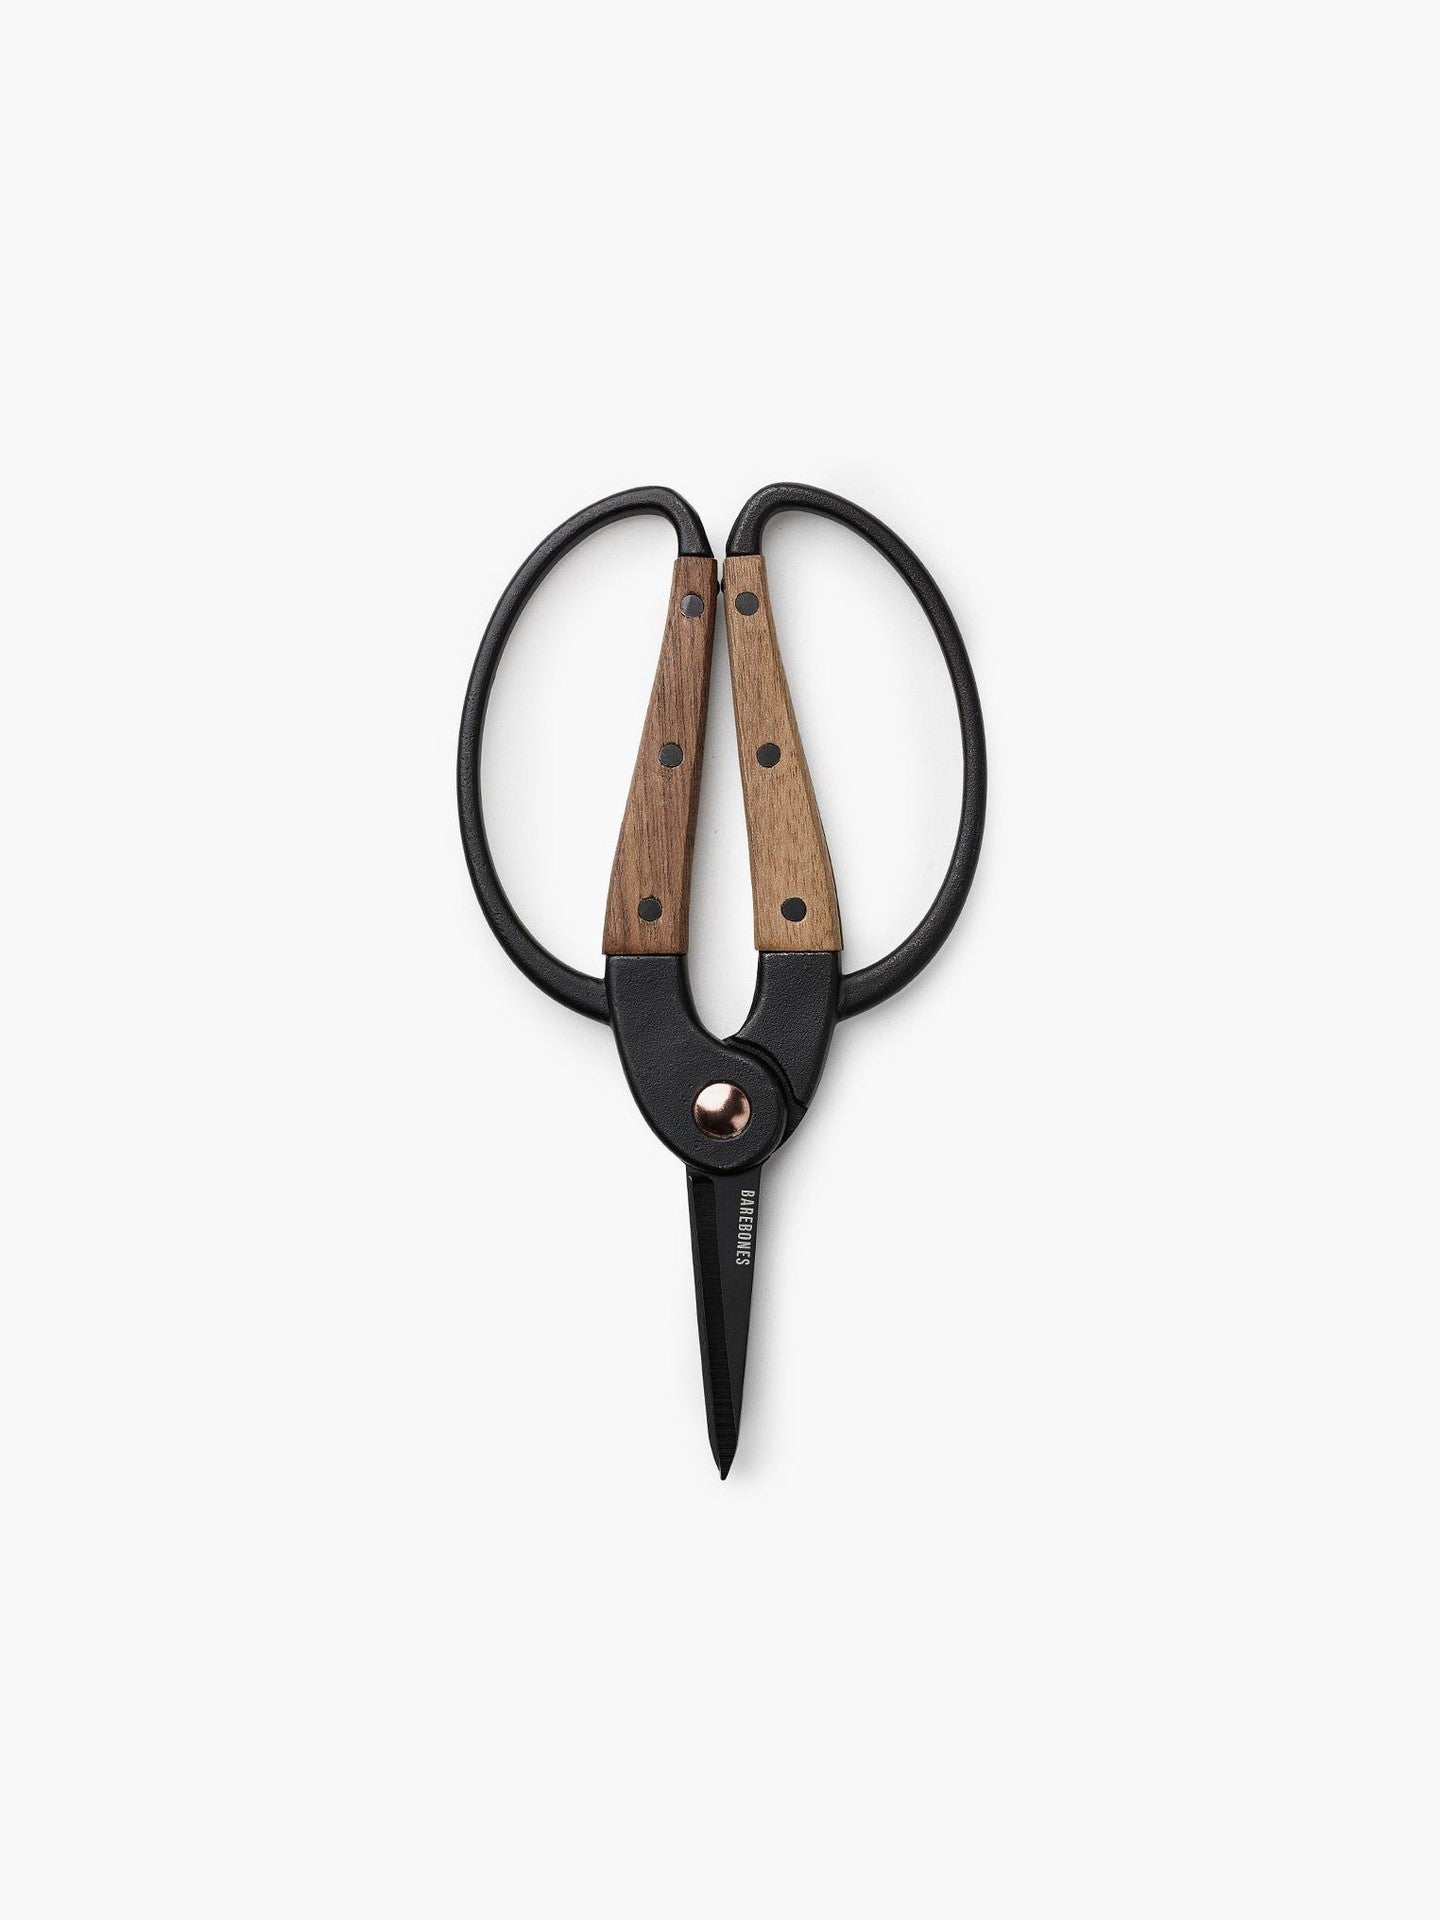 A pair of Barebones Walnut Garden Scissors – Small in black and brown color on a white surface.